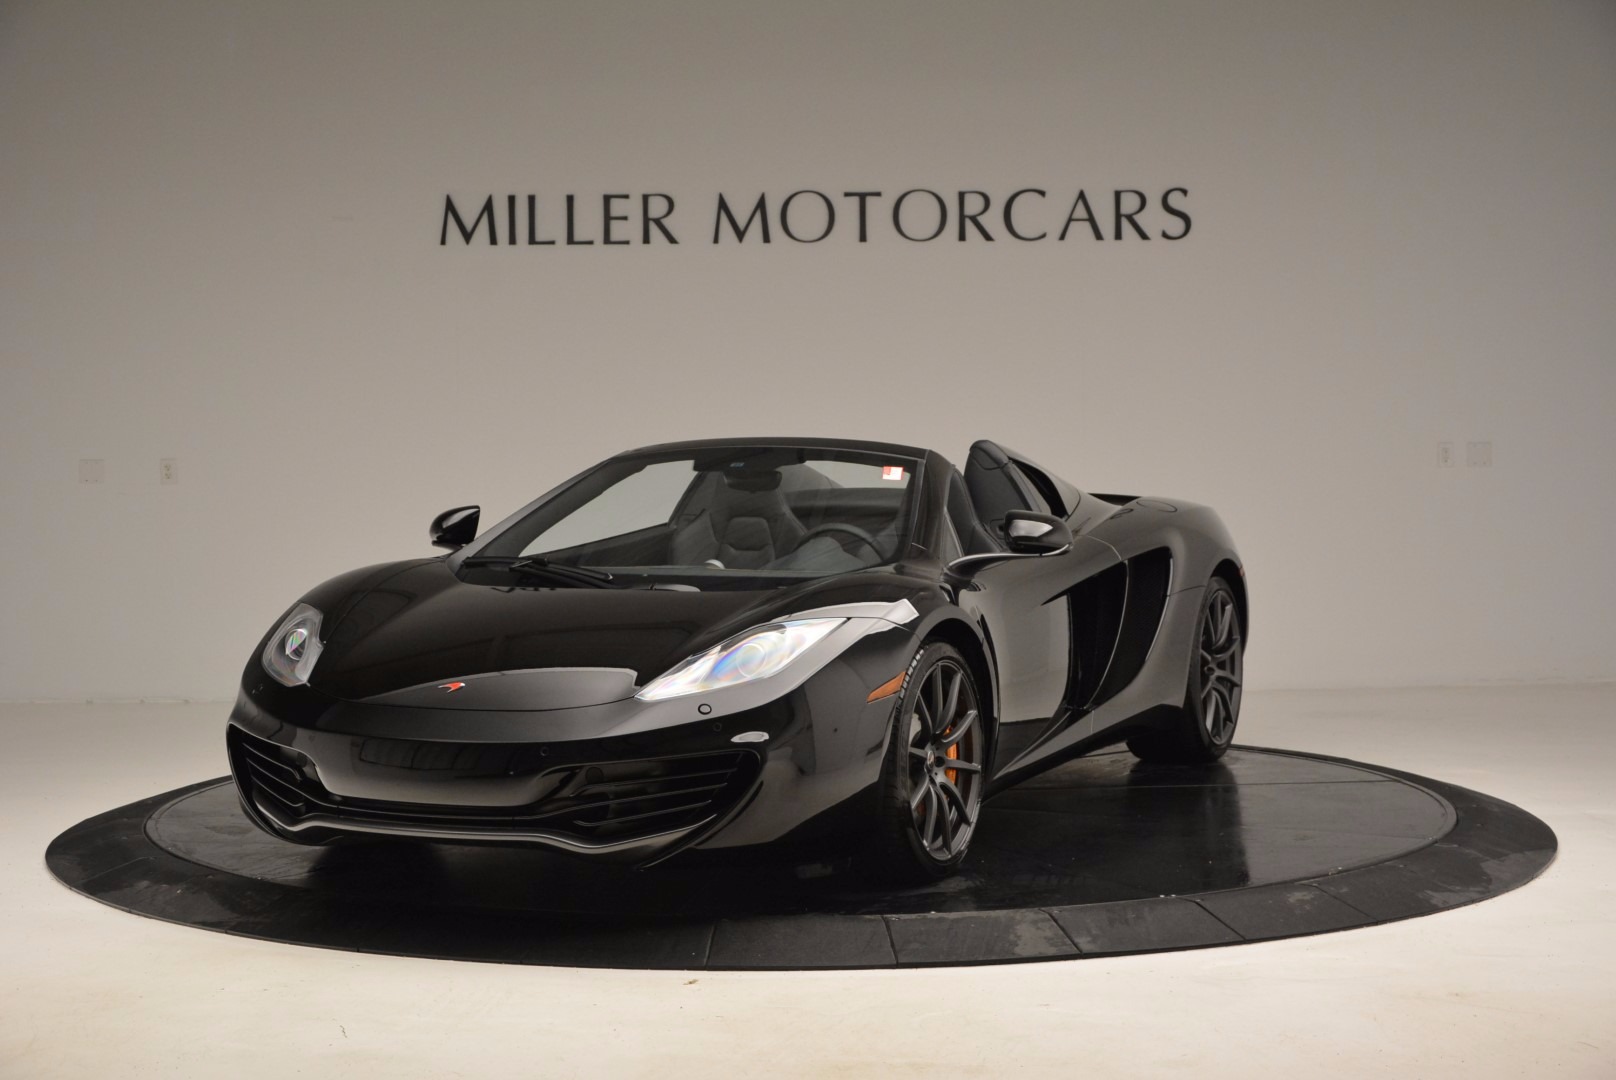 Used 2013 McLaren 12C Spider for sale Sold at Aston Martin of Greenwich in Greenwich CT 06830 1